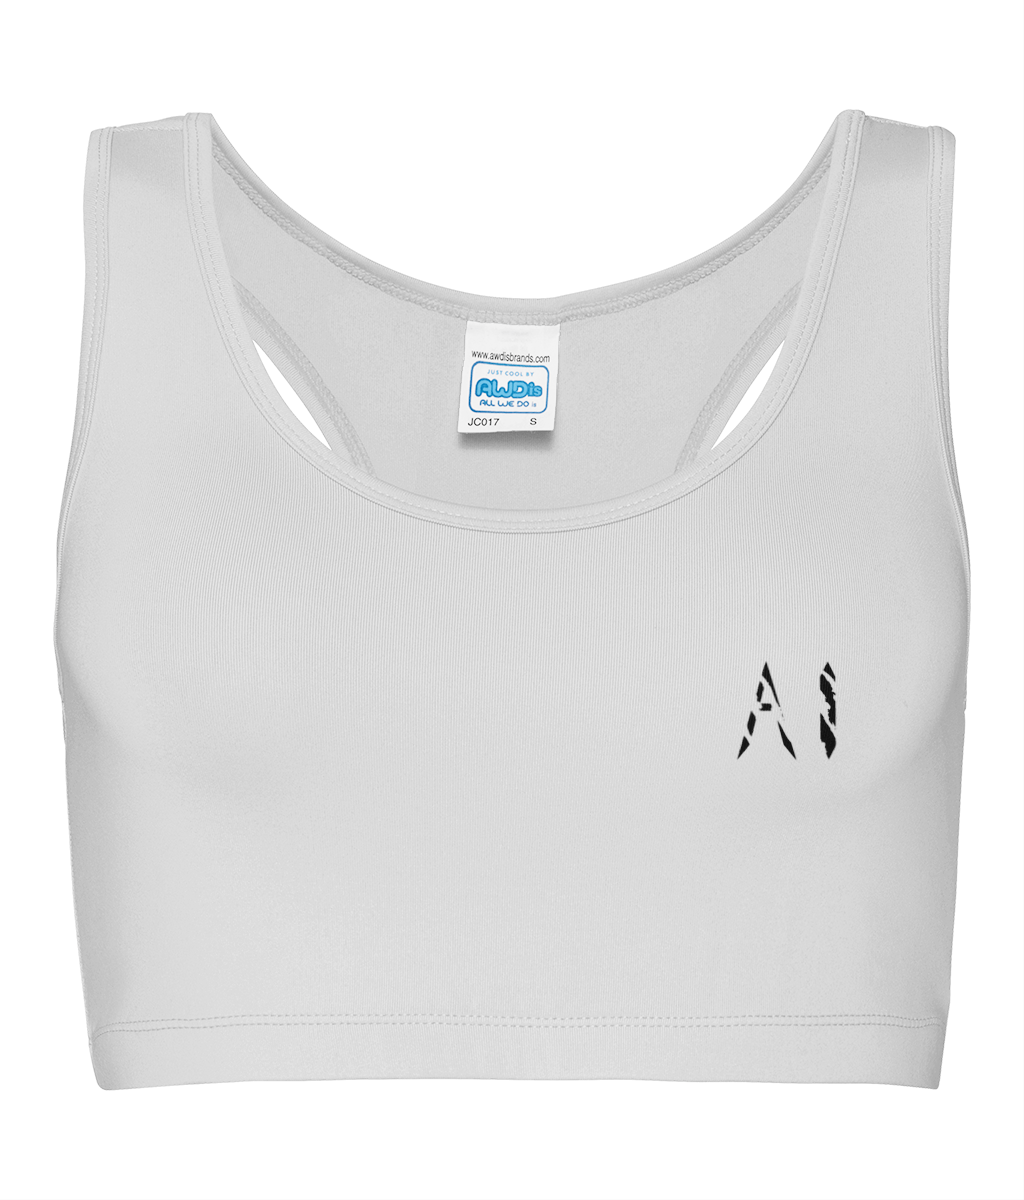 Womens White Athletic Performance Cropped Top with black logo on left breast